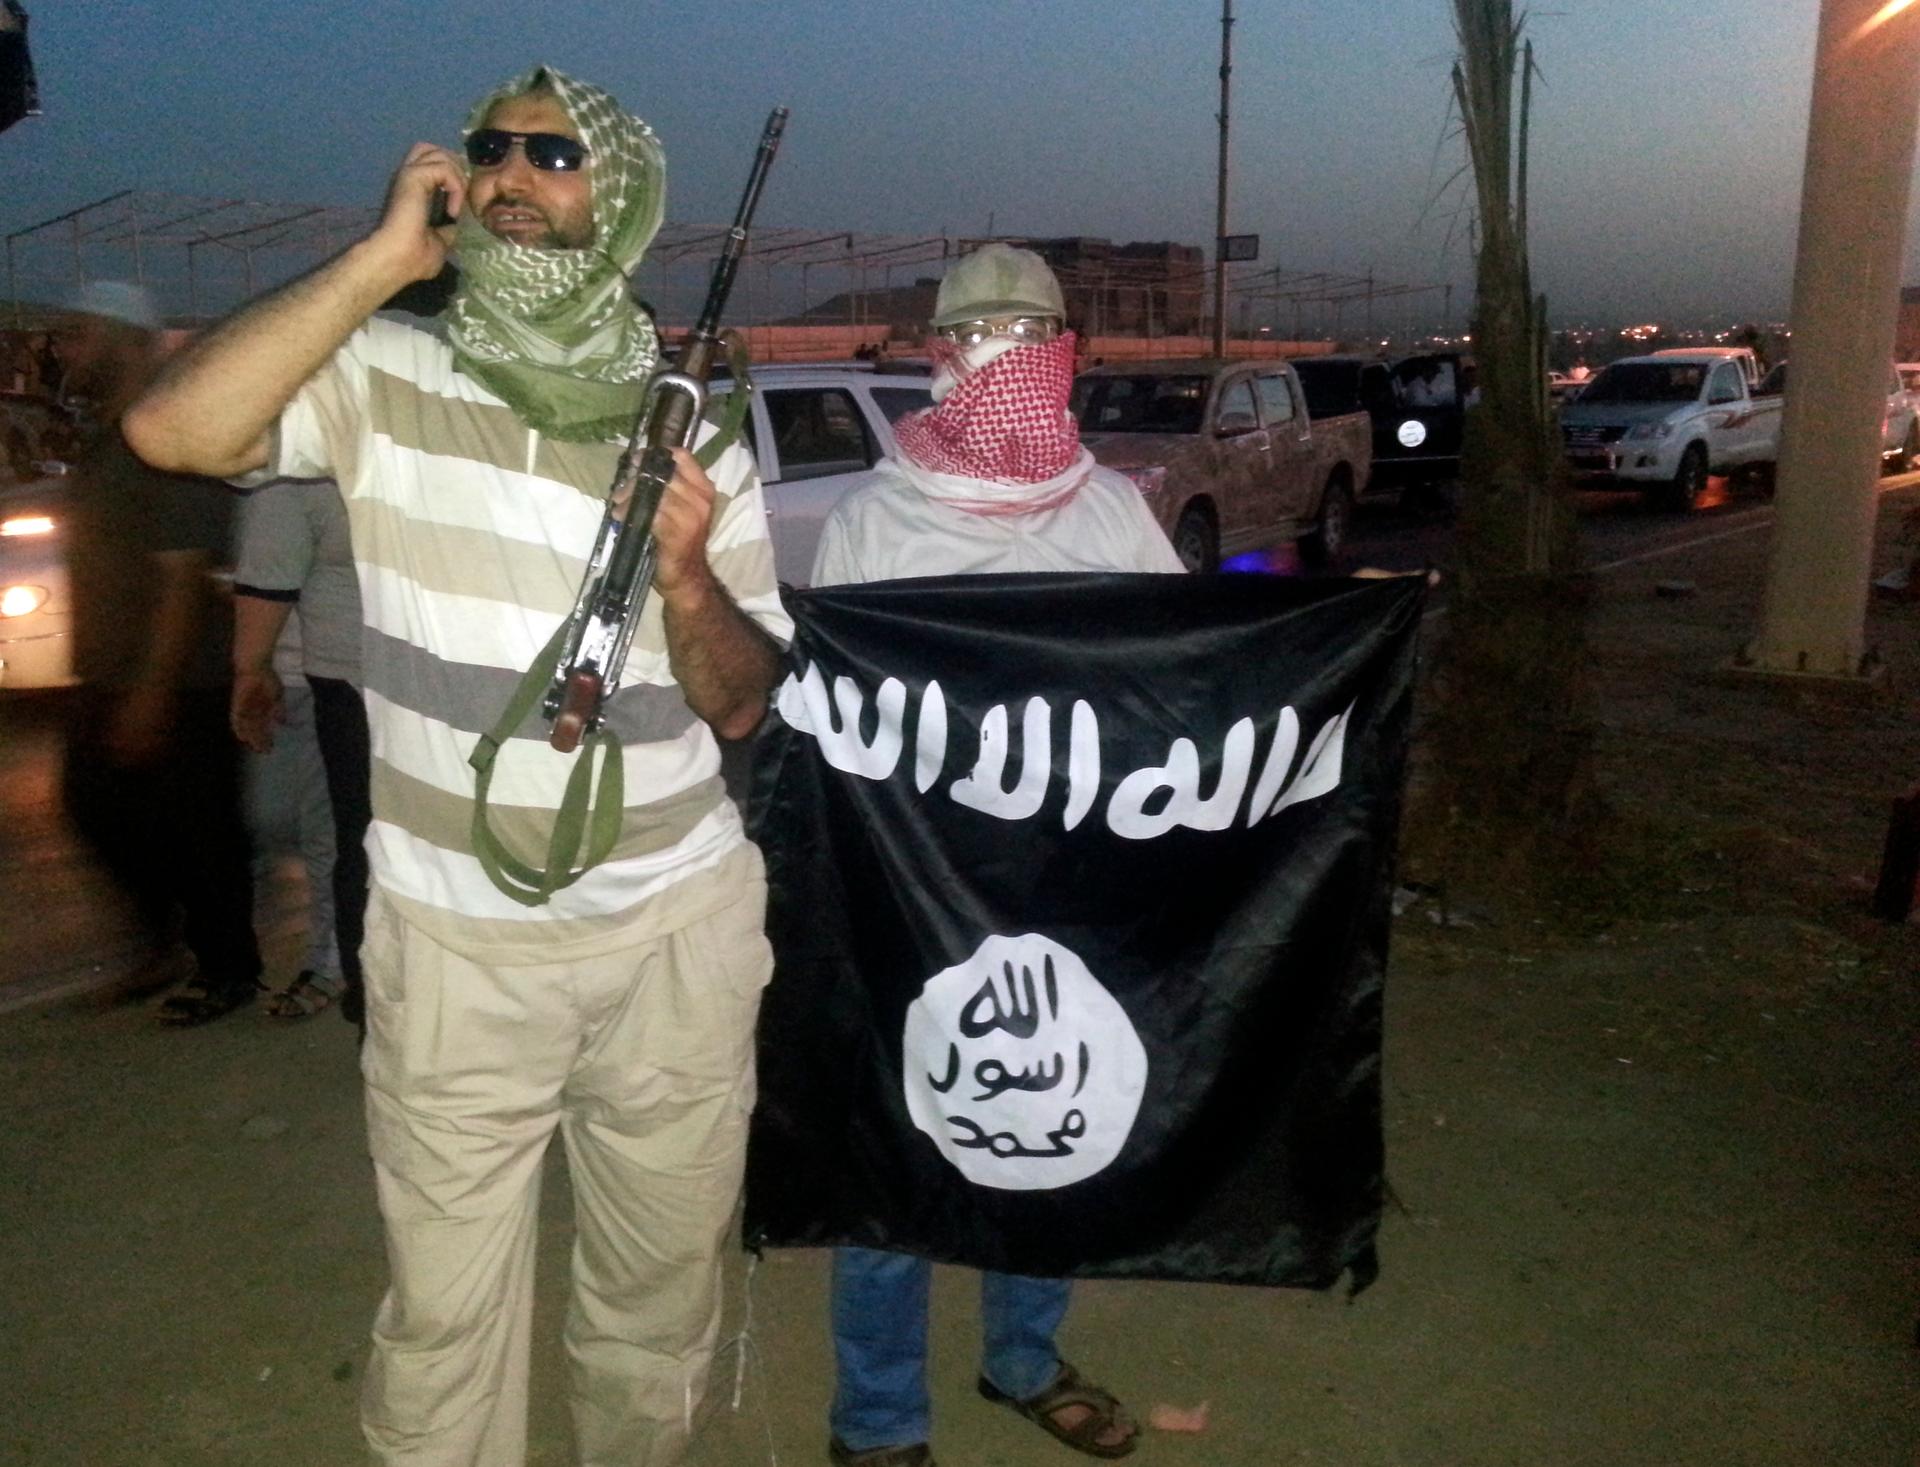 A fighter of the Islamic State of Iraq and the Levant (ISIL) holds a weapon while another holds a flag in the city of Mosul, shortly after the Islamic State captured the city. The flag reads, "There is no God but God, and Muhammad is the Messenger of God.